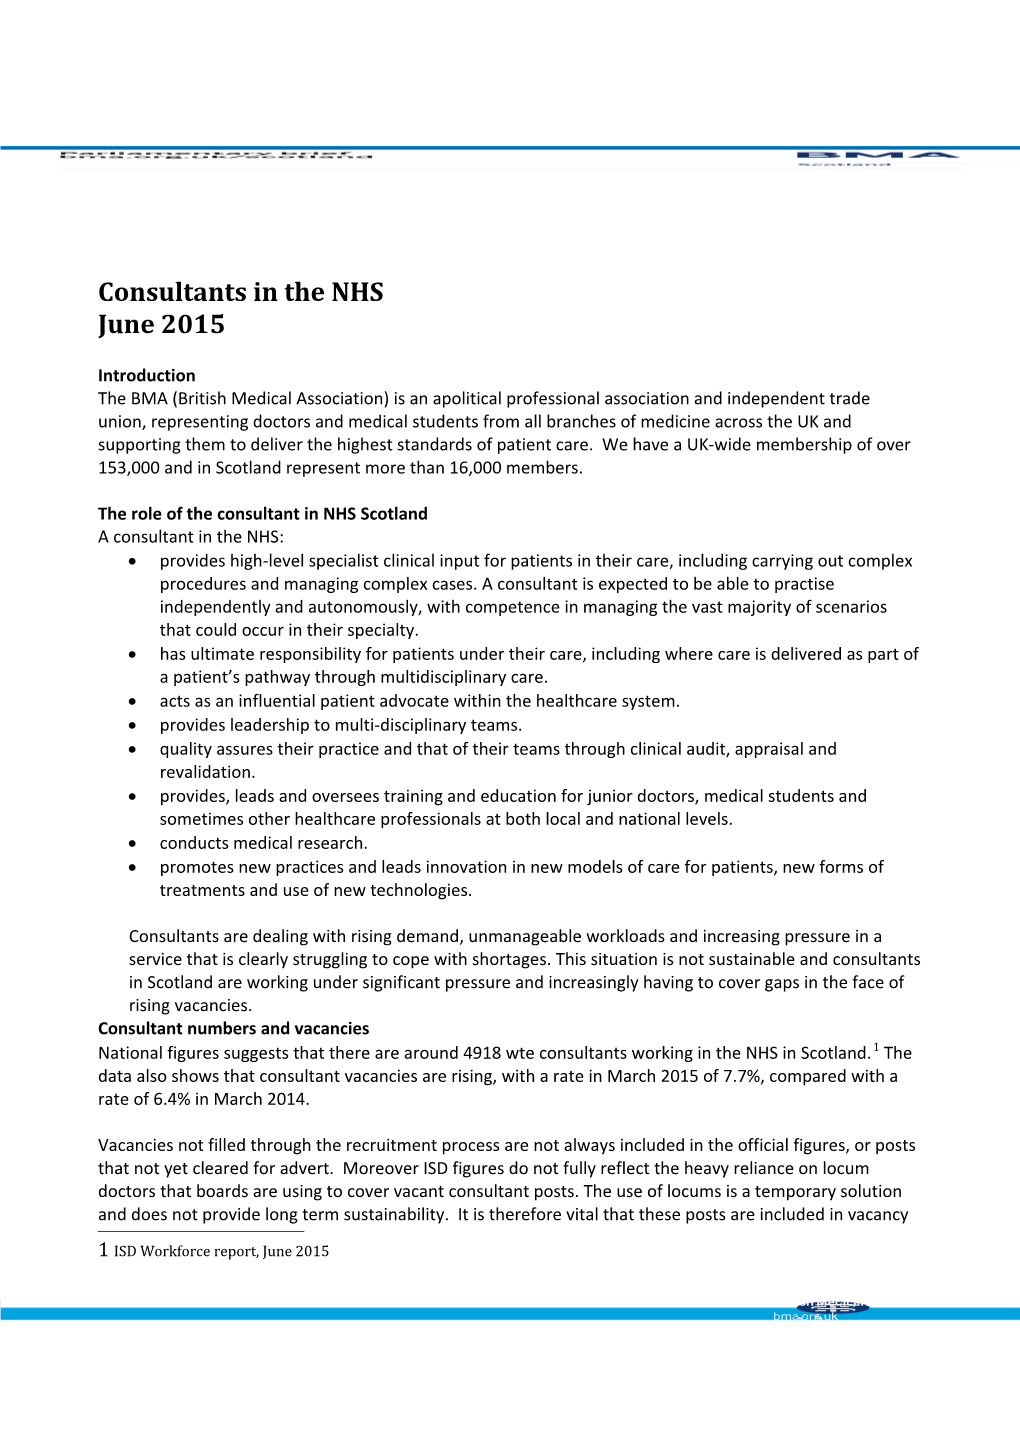 The Role of the Consultant in NHS Scotland